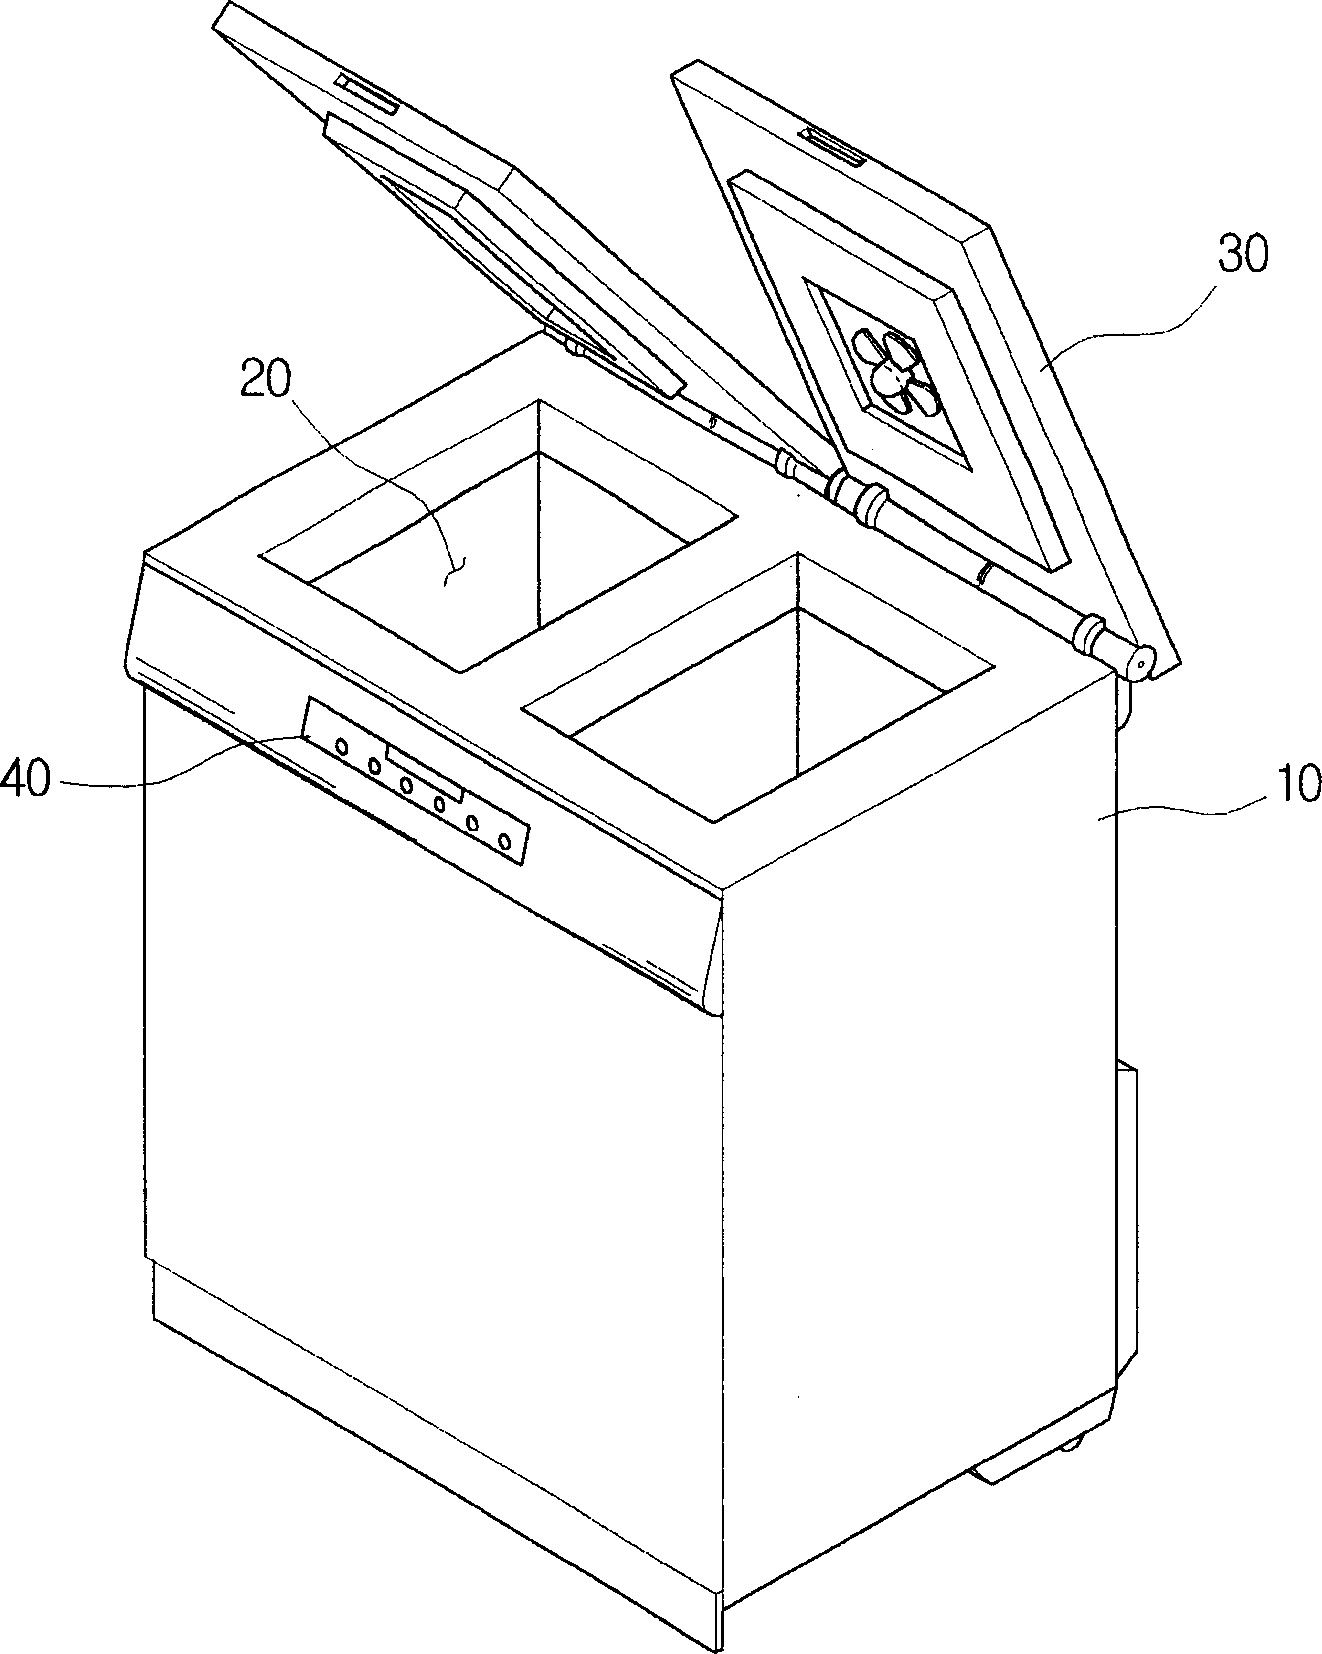 Structure of display apparatus for refrigerator